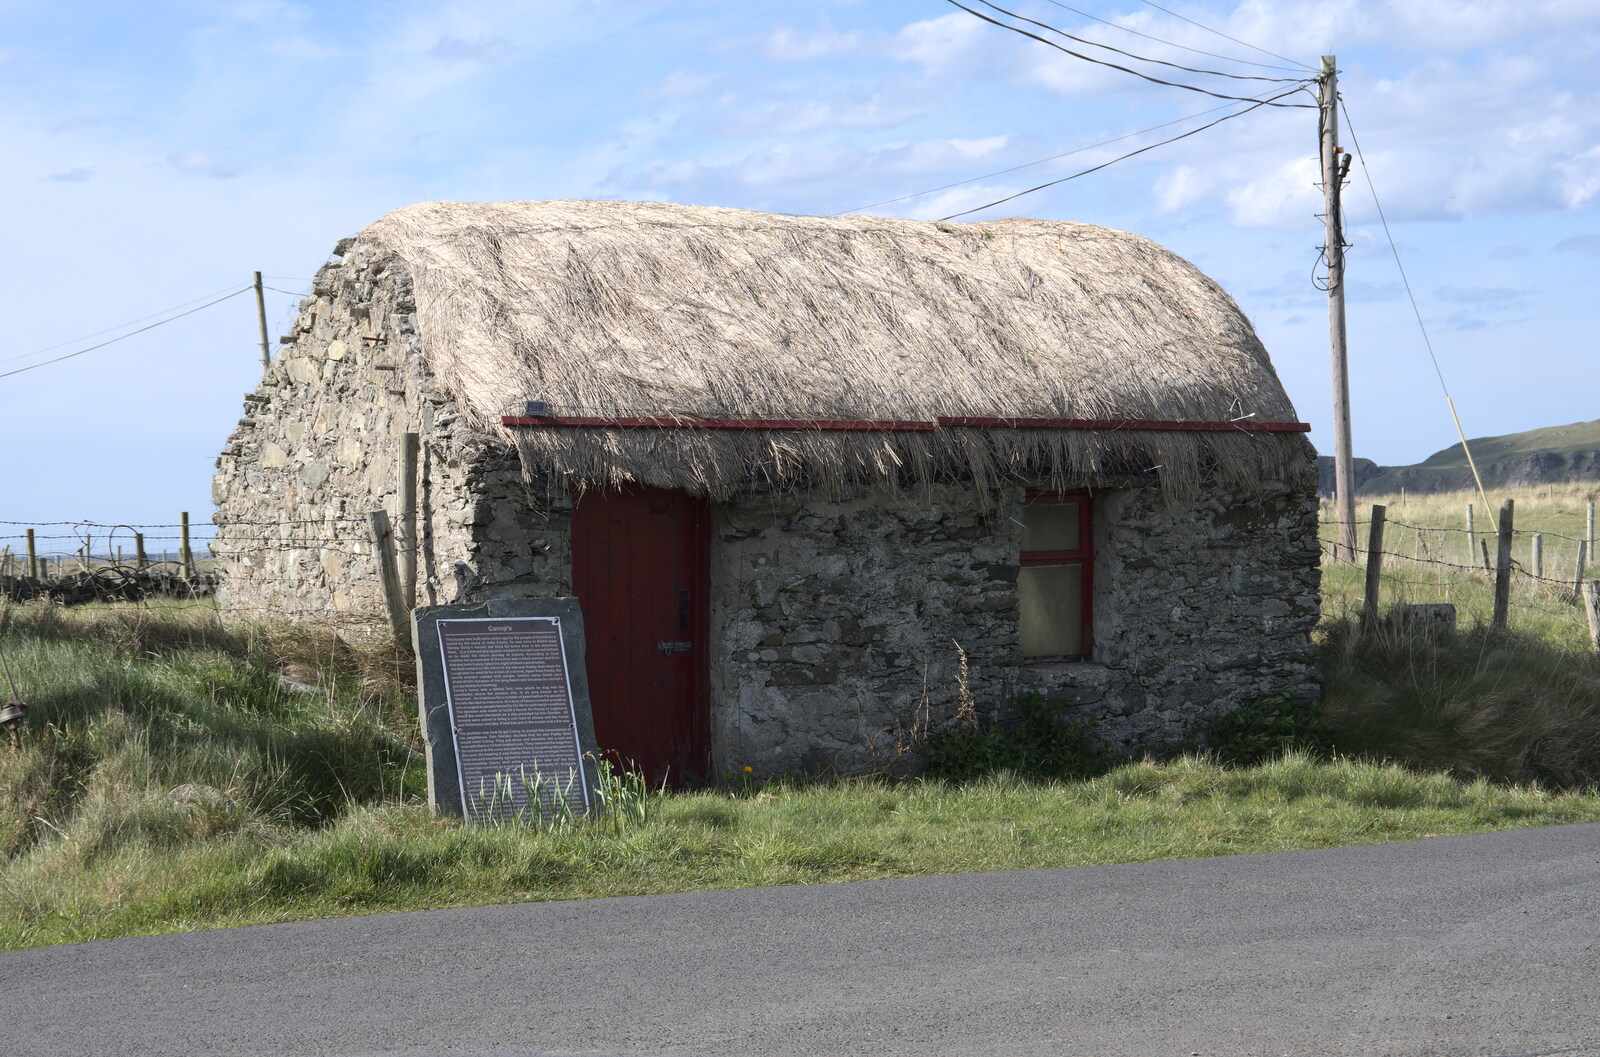 Greencastle, Doagh and Malin Head, County Donegal, Ireland - 19th April 2022: Canny the Hermit's House in Doagh